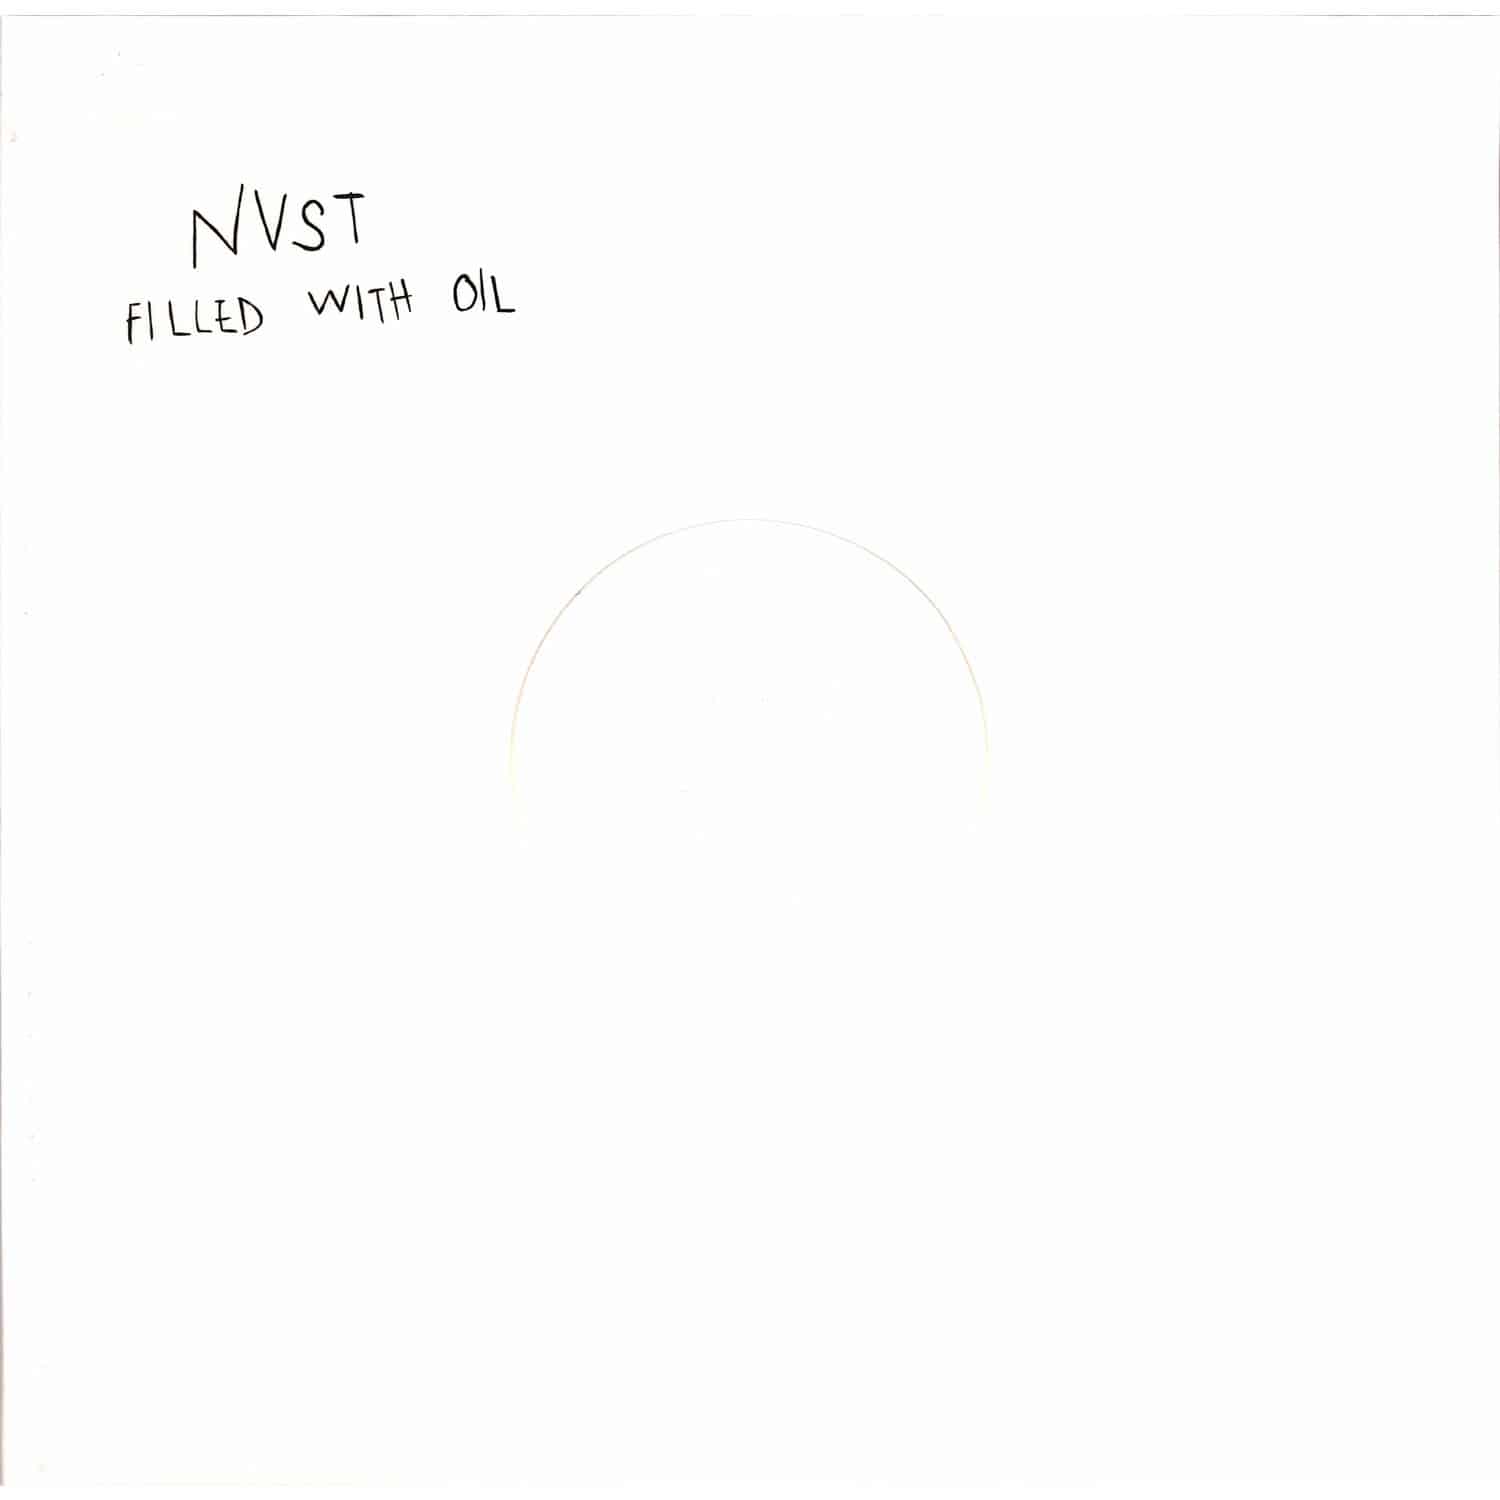 NVST - FILLED WITH OIL